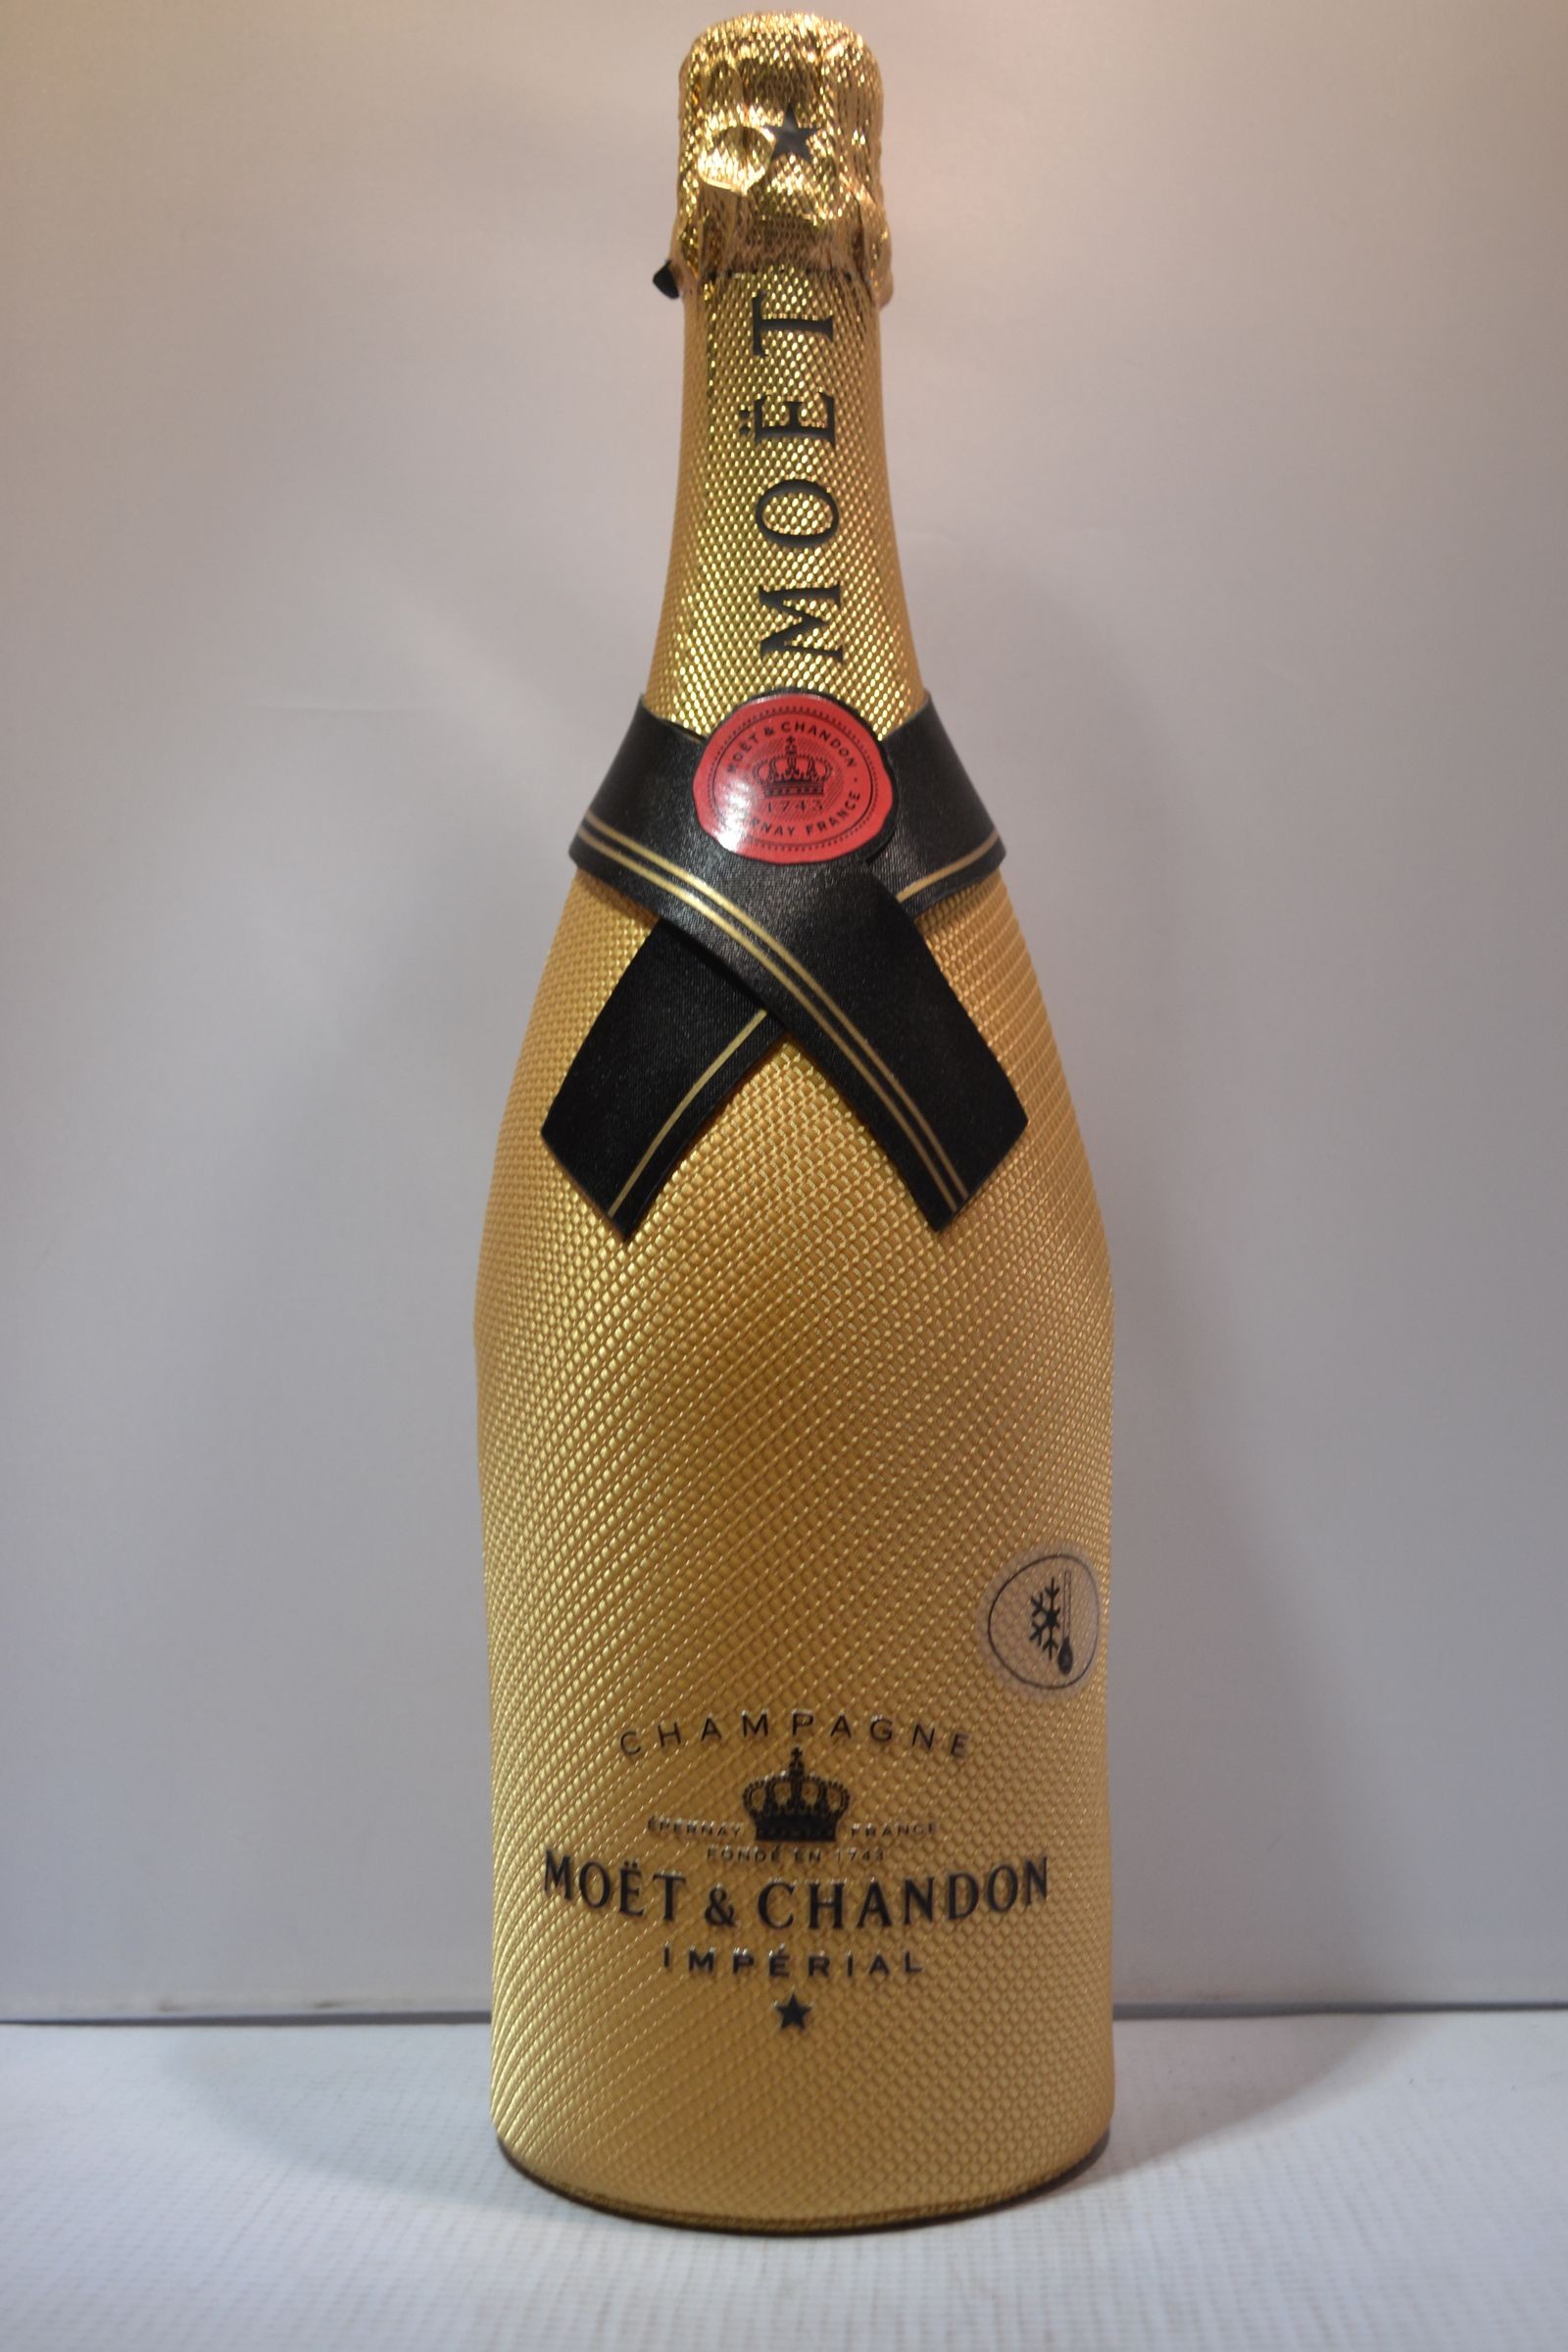 Moet & Chandon Champagne Brut Imperial - Find Rare Whiskey